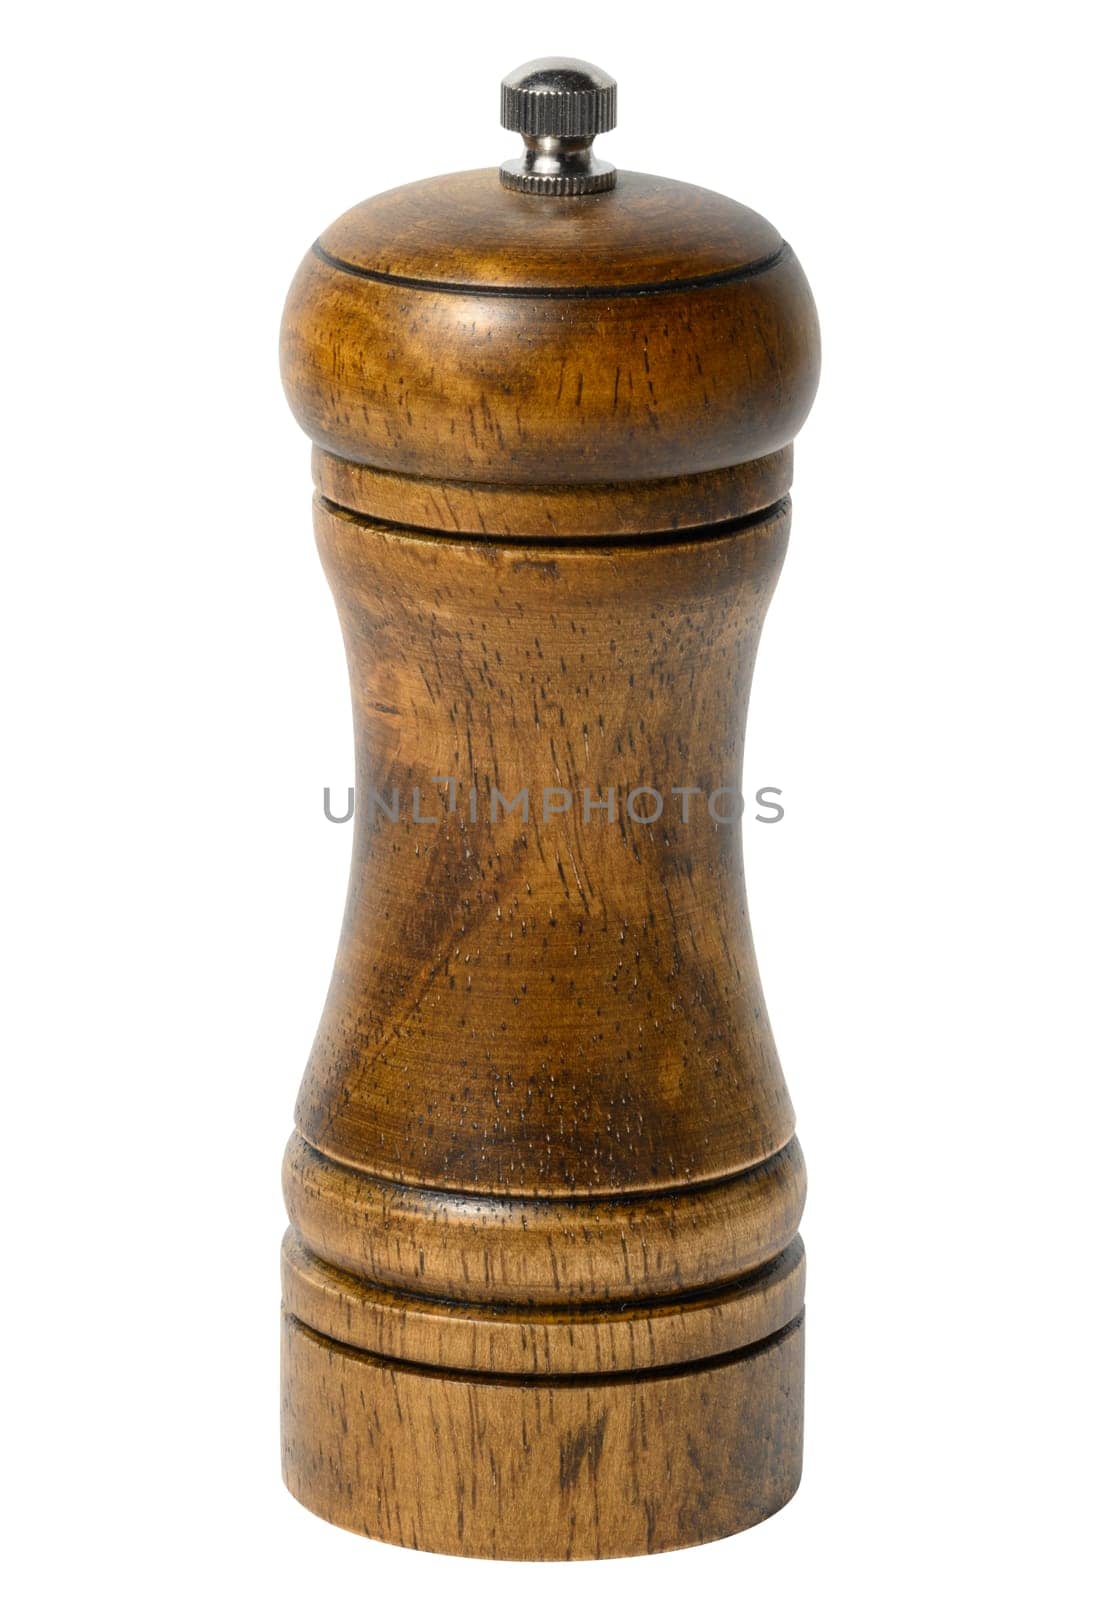 Wooden pepper mill on a white background, made of wood and has a metal handle on top